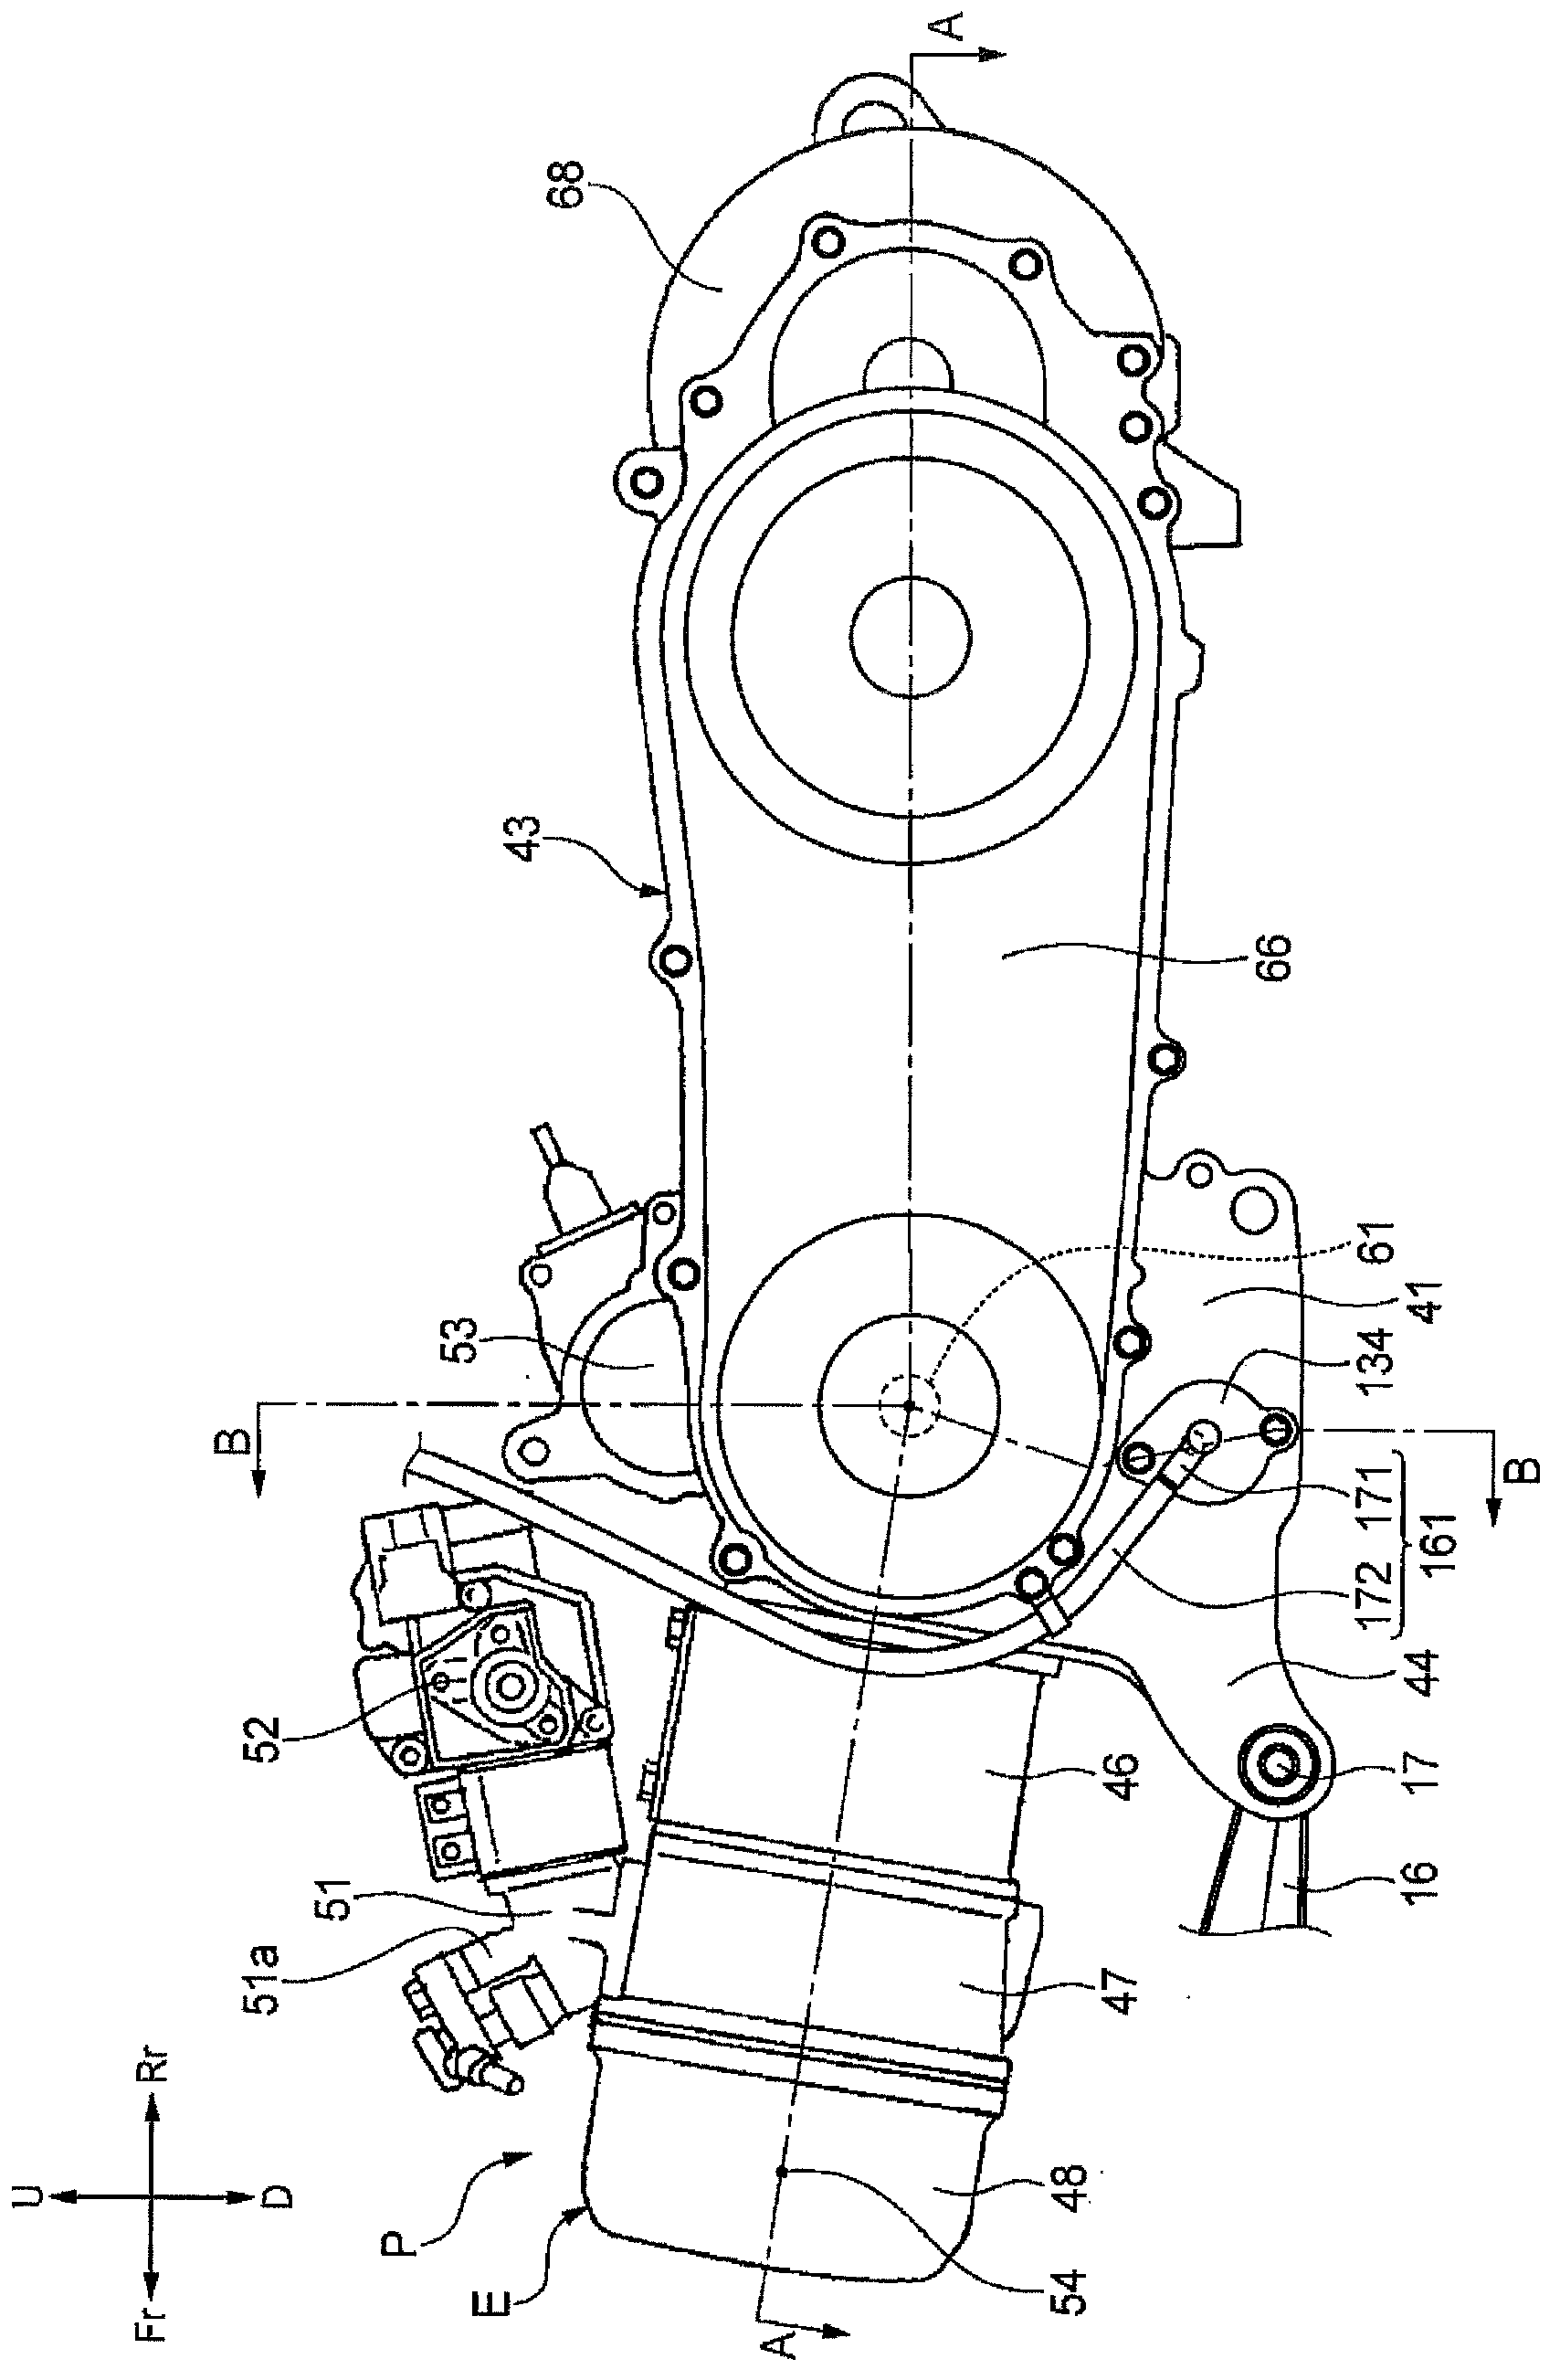 Fuel gas treatment device